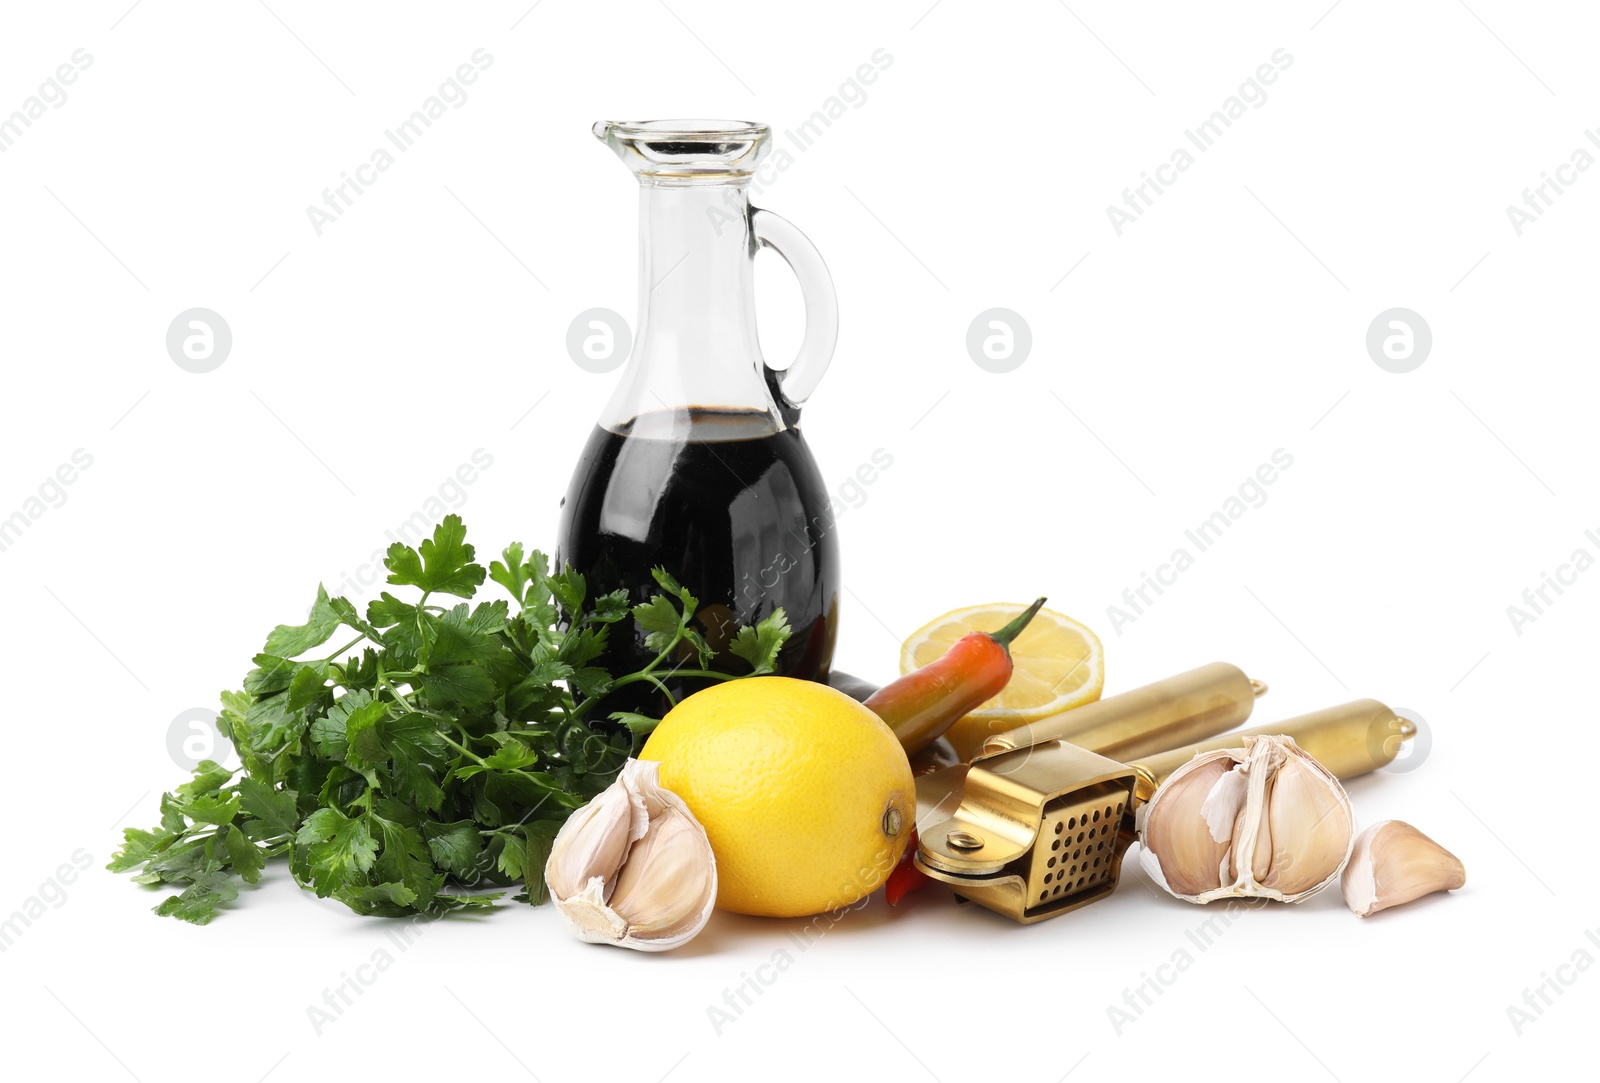 Photo of Different fresh ingredients for marinade and garlic press on white background